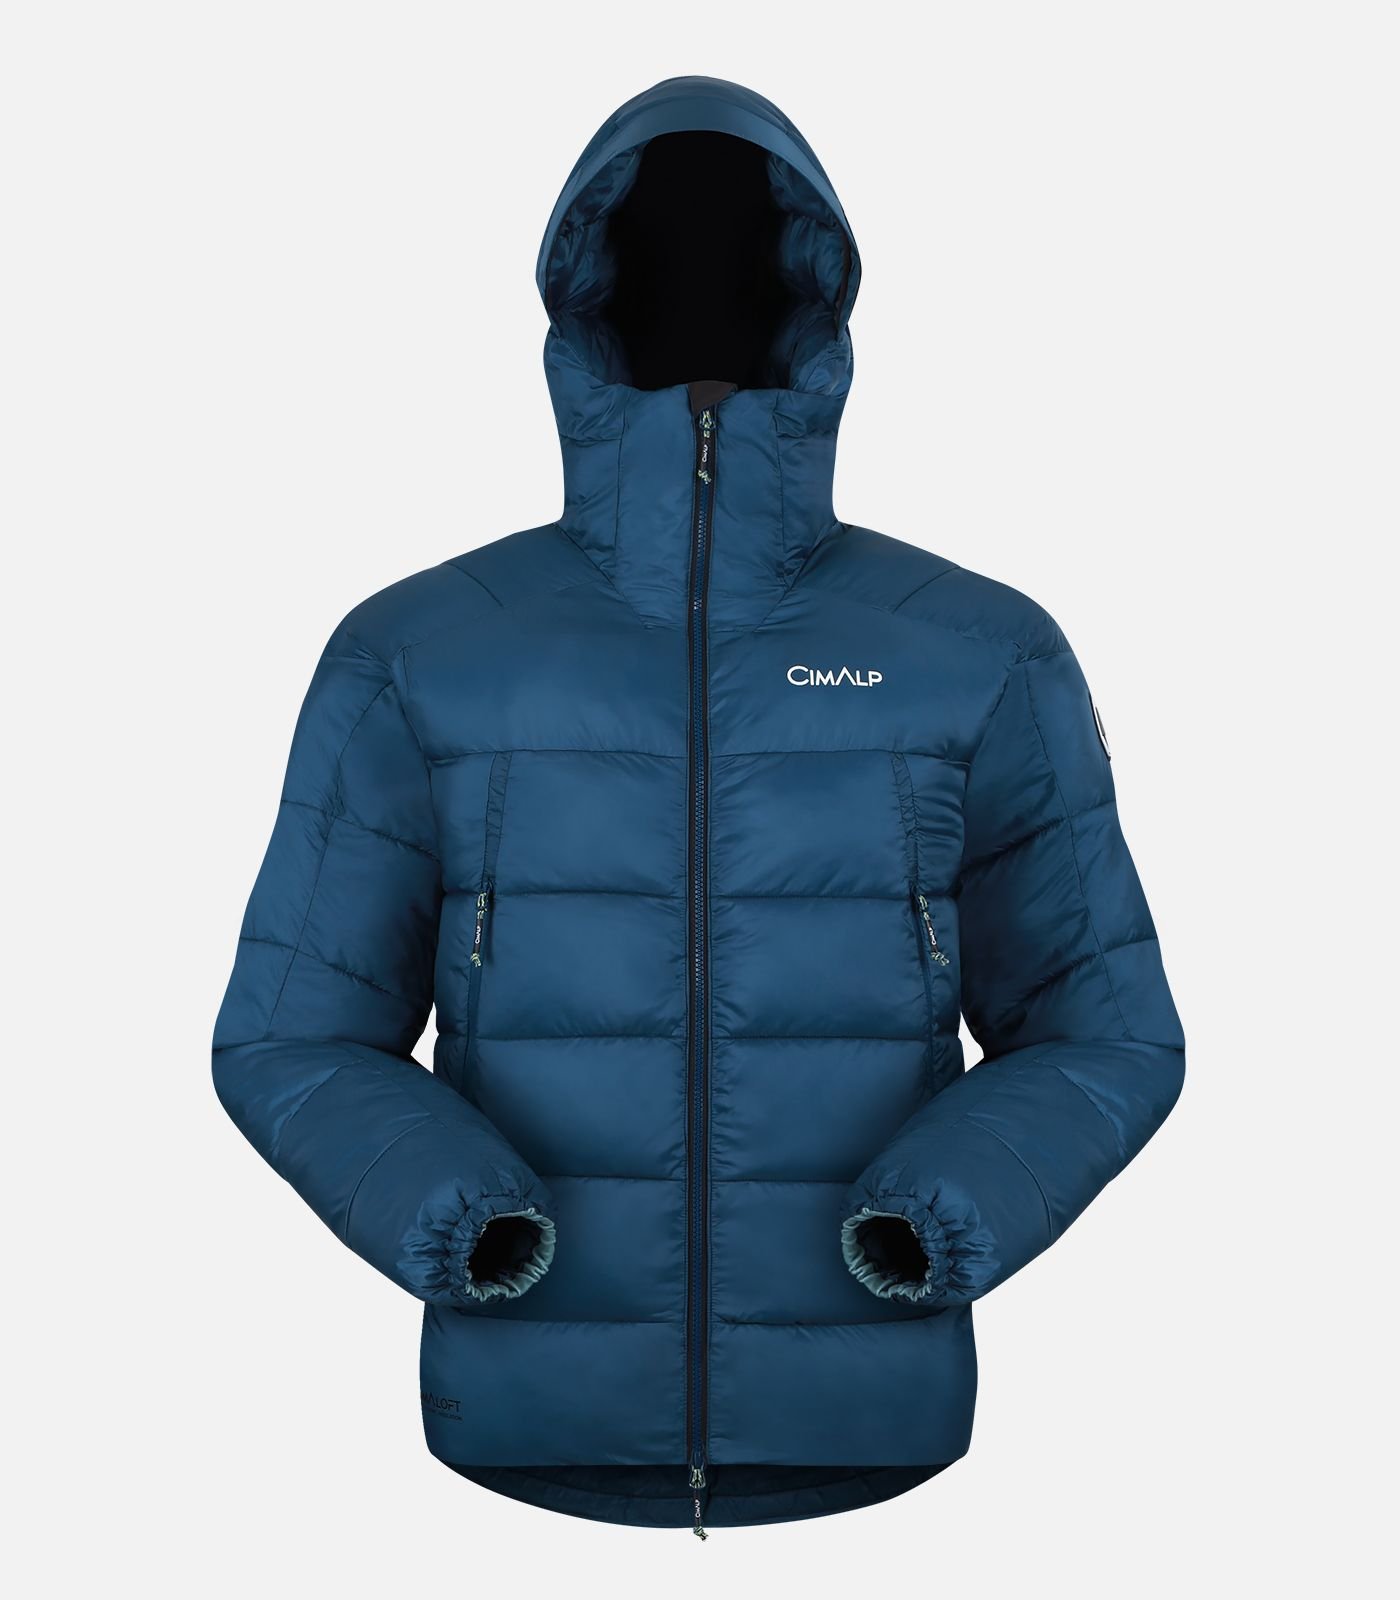 Warm and durable puffer jacket